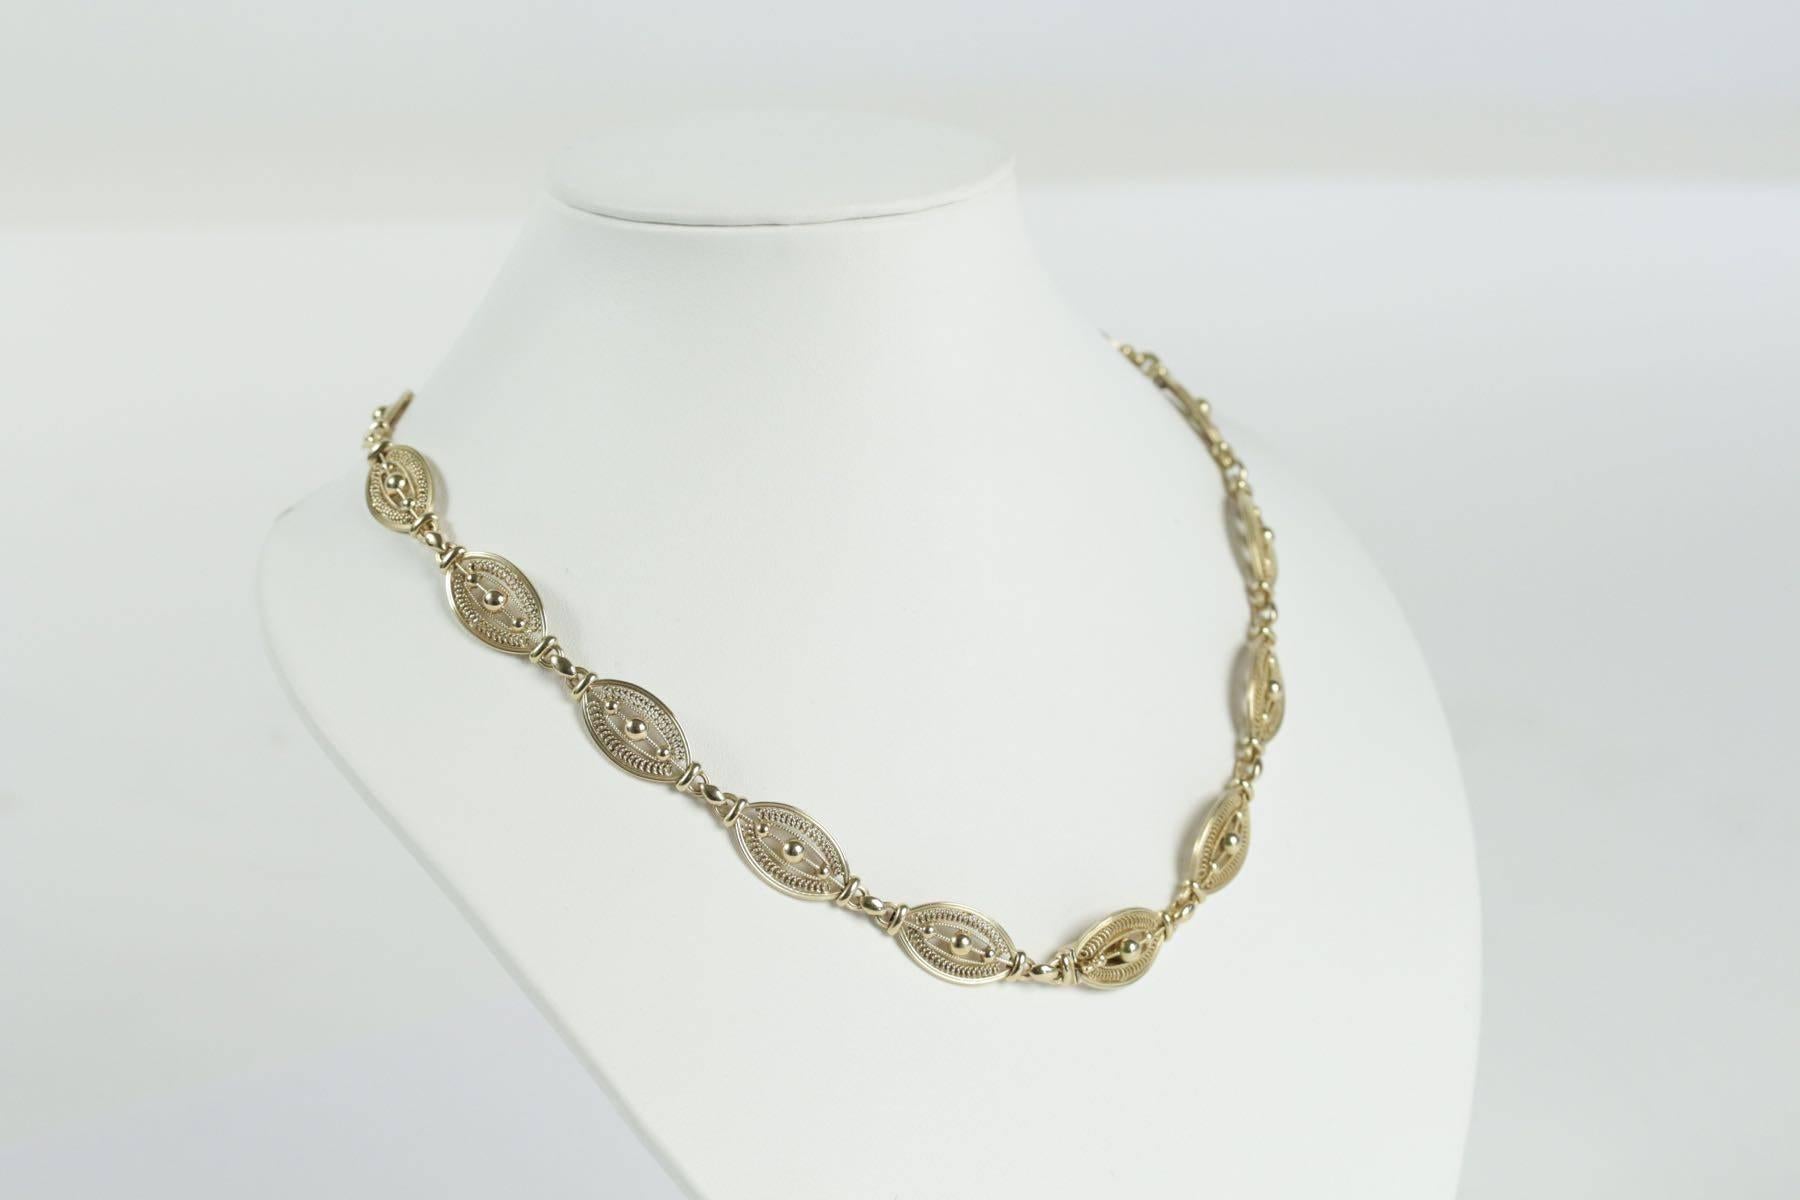 18k yellow gold necklace.
Can be transformed and used as a bracelet.
French work. Circa 1900. 

Total necklace length: 40 cm
Total bracelet length: 17.5 cm